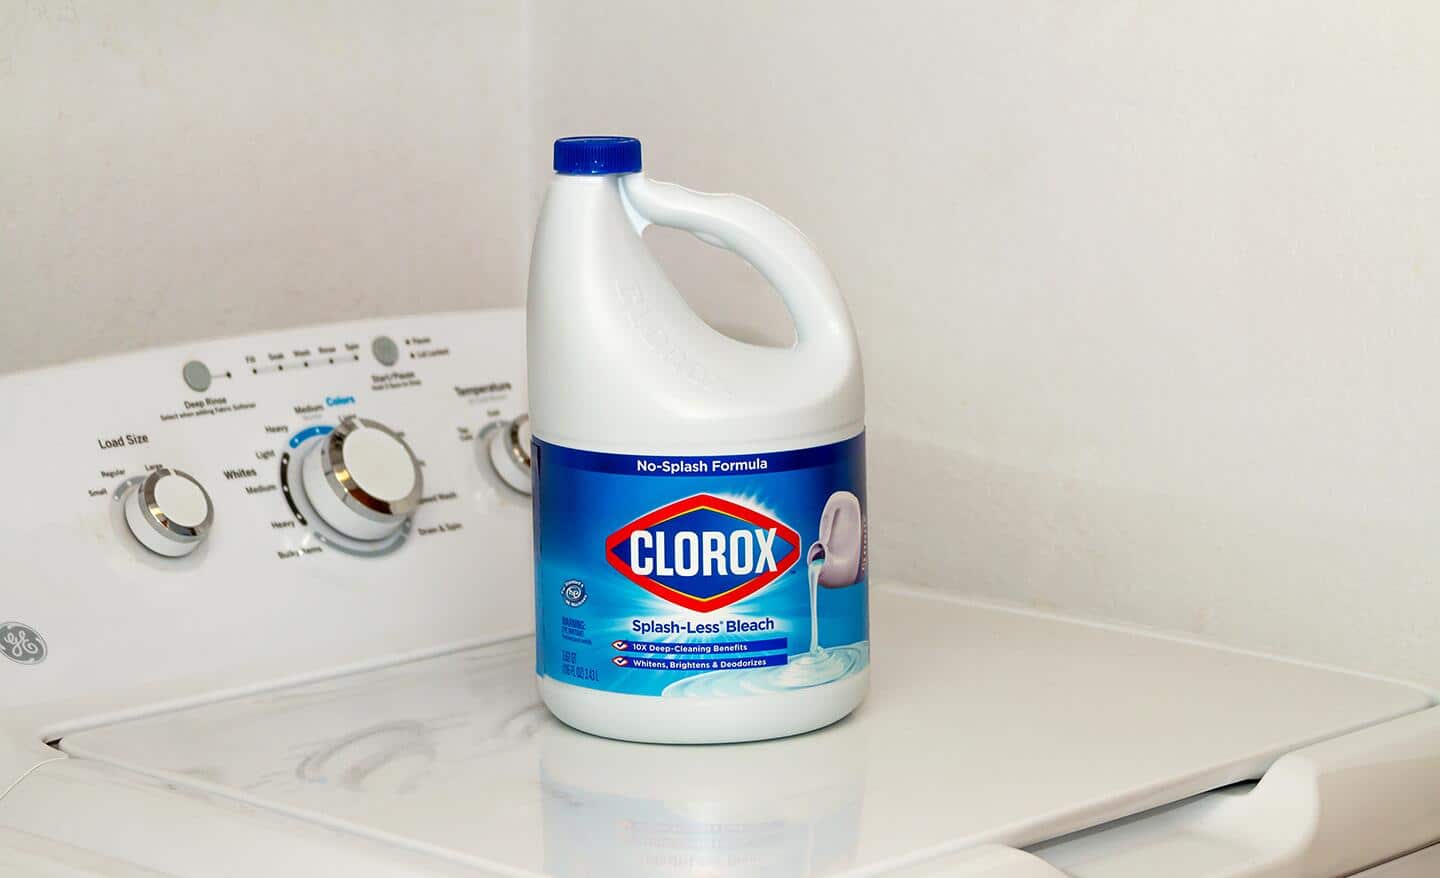 A bottle of bleach sitting on top of a washing machine.